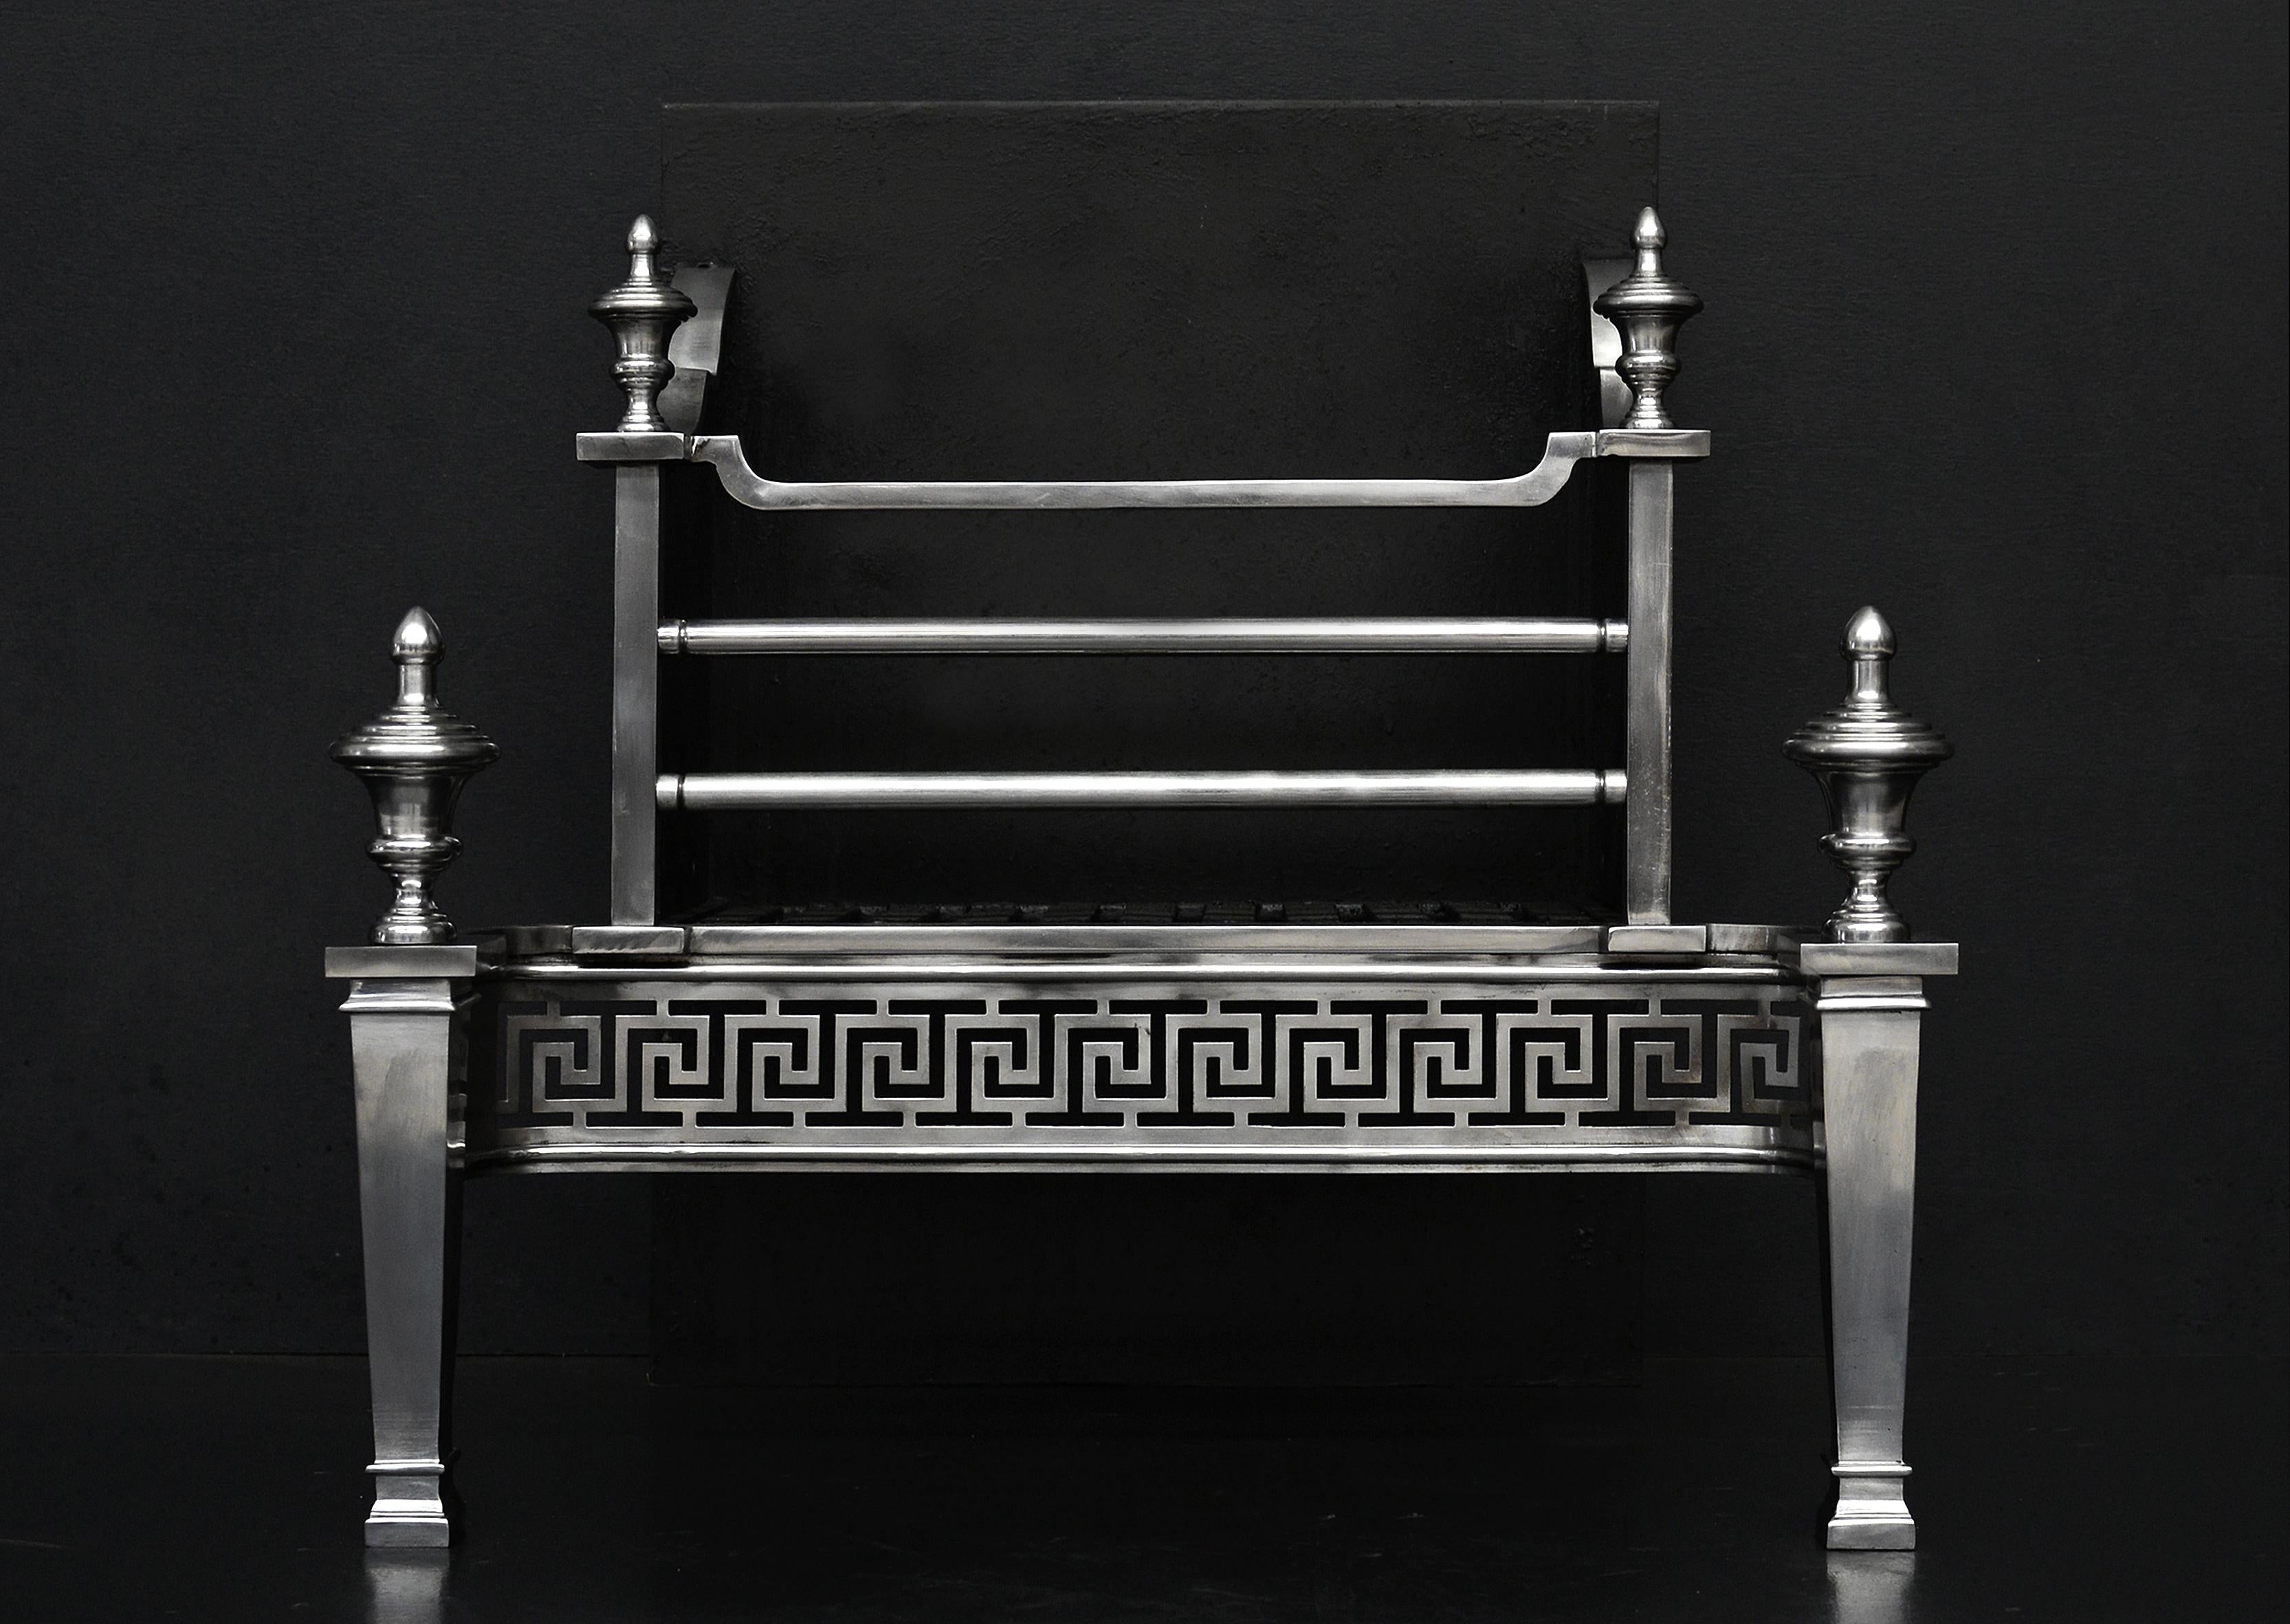 An English firegrate in the Georgian style. The tapering legs surmounted by urn finials, the burning area with steel front bars and shaped top bar. Polished steel fret with Greek key motif throughout. Plain cast iron fireback behind.